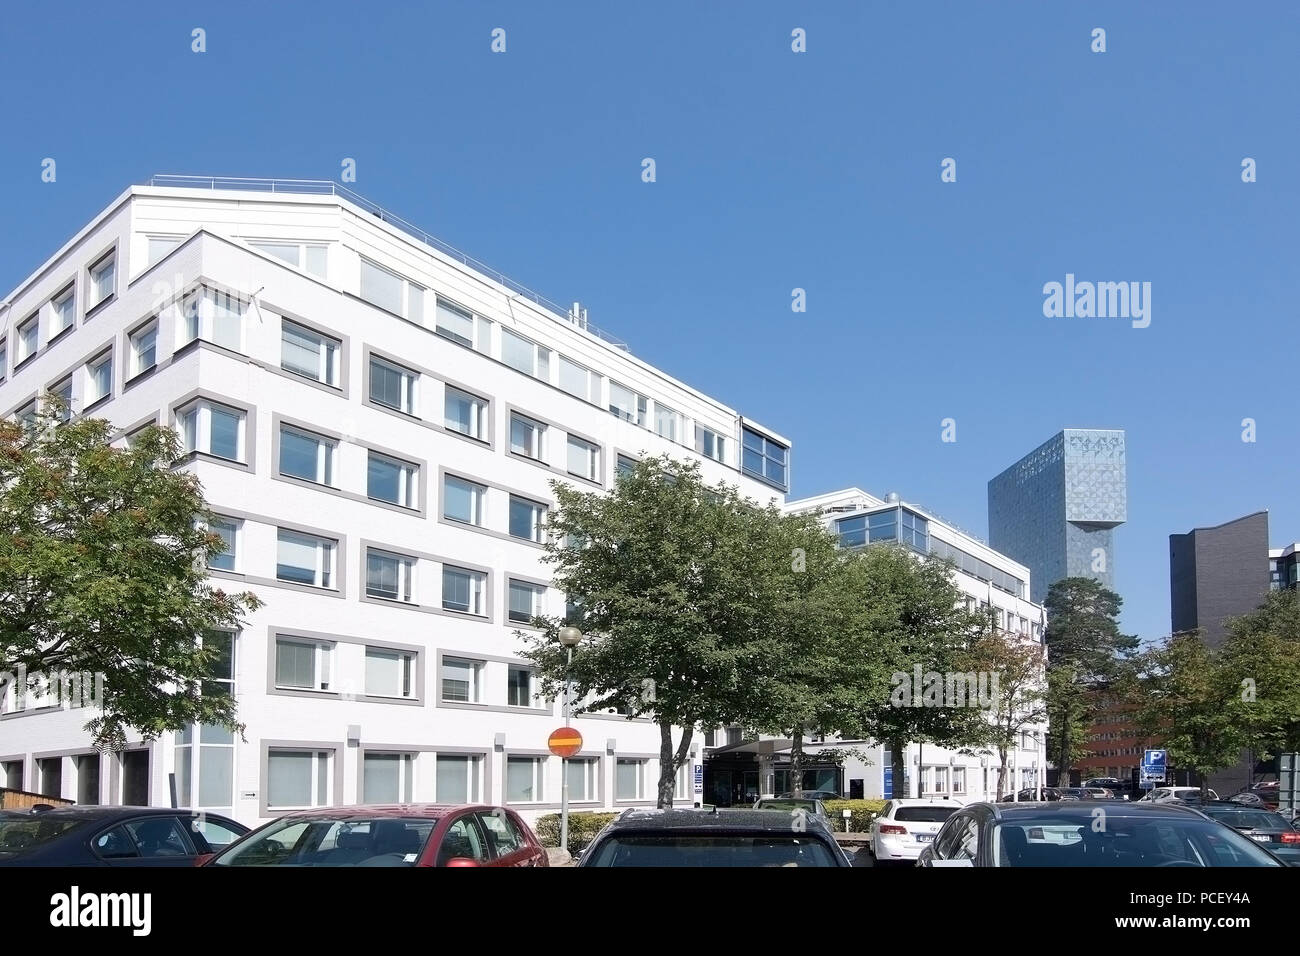 STOCKHOLM, SWEDEN - JULY 17, 2018: Modern architecture with highrise building in Kista on a sunny day with blue sky on July 17, 2018 in Stockholm, Swe Stock Photo